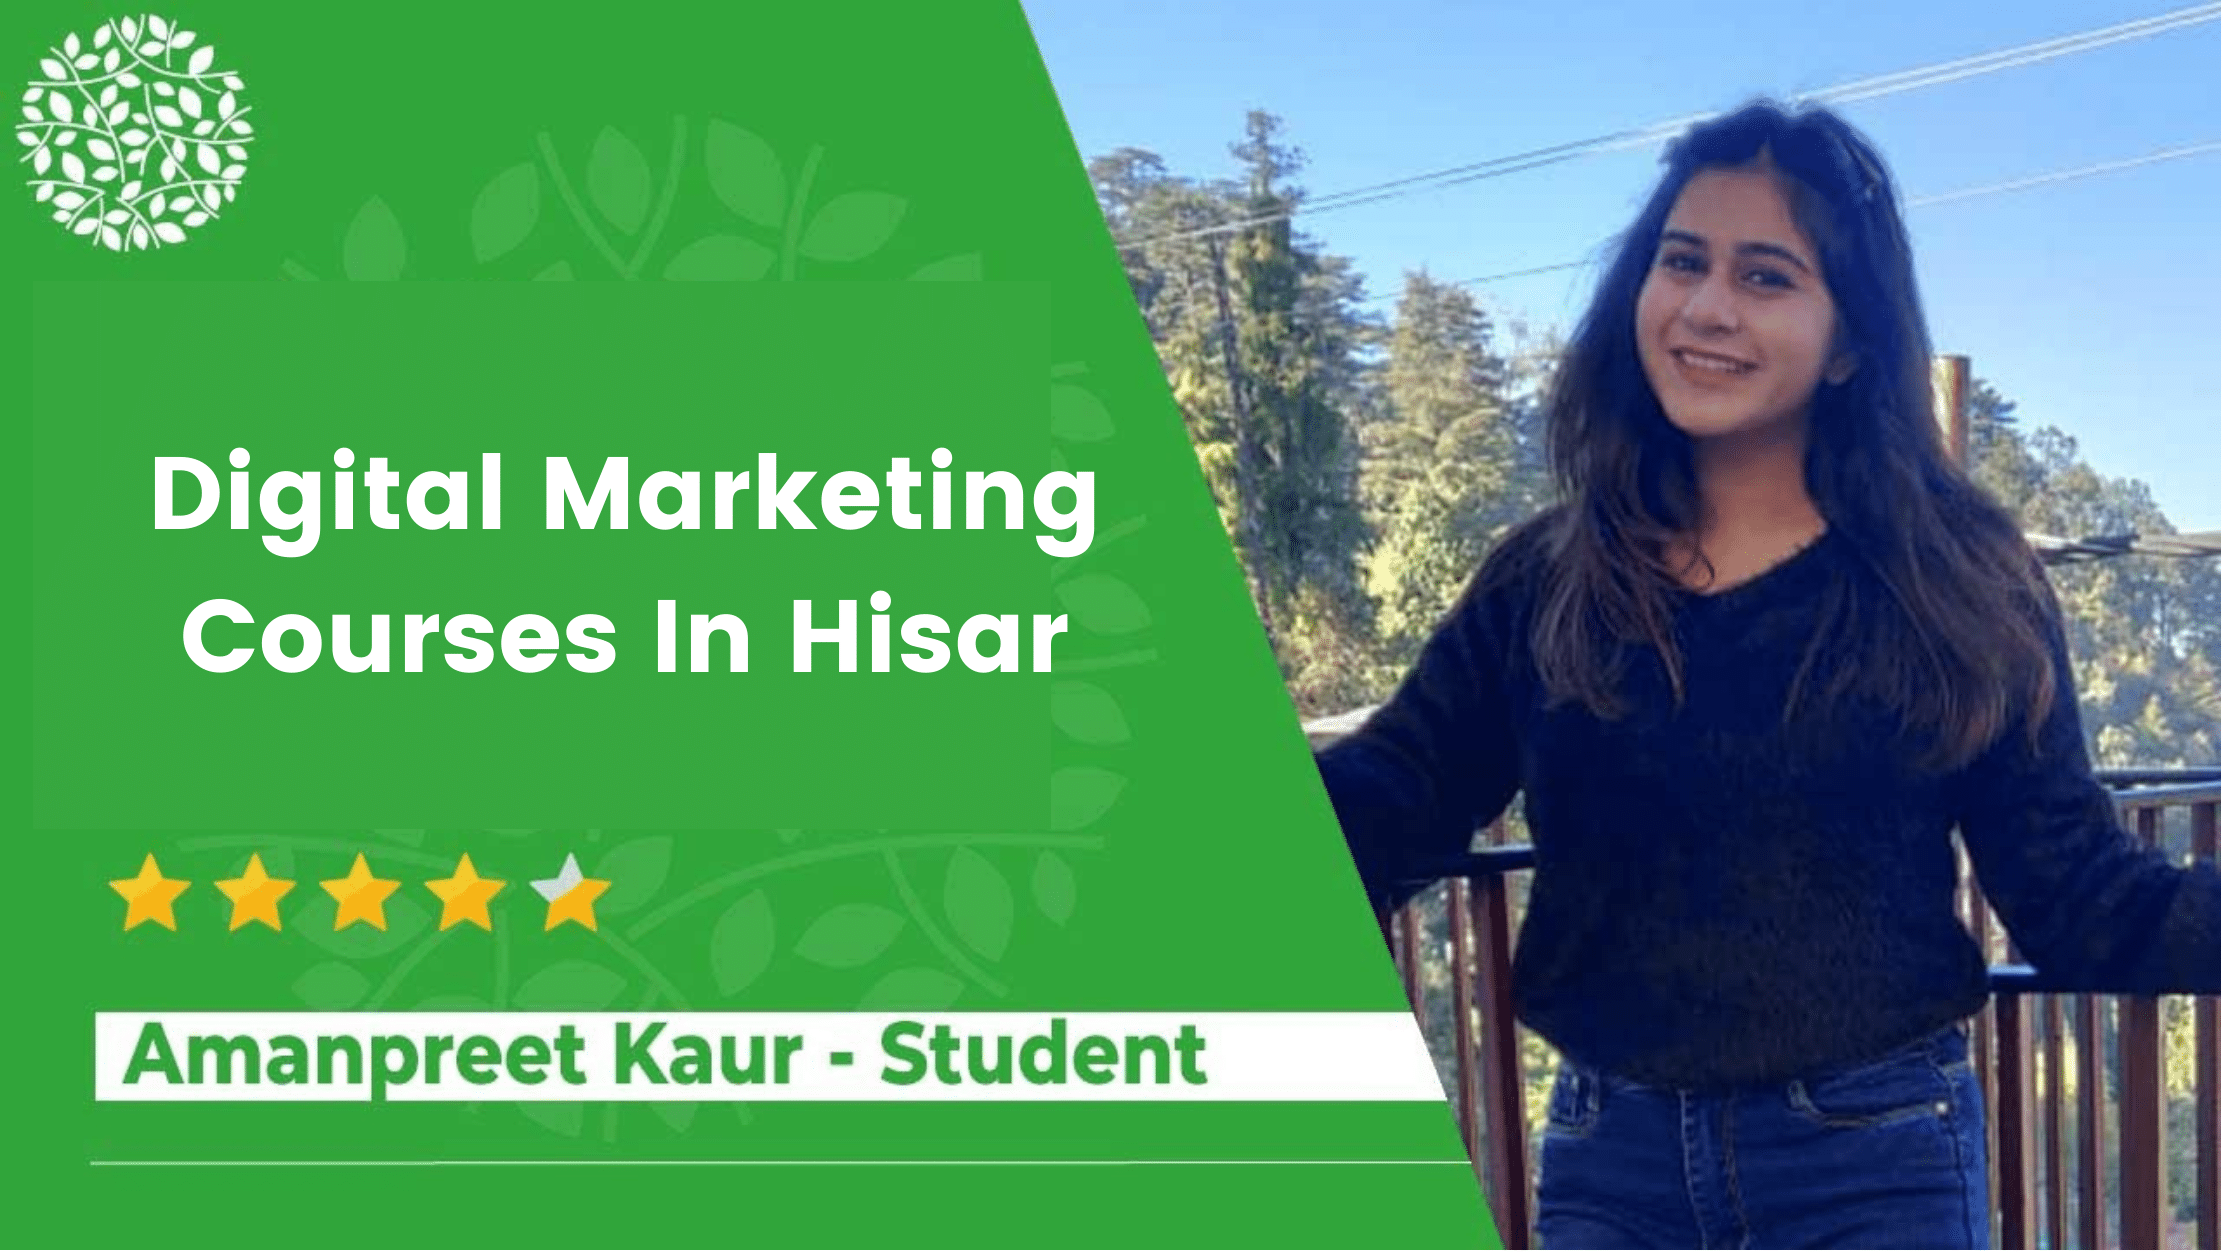 Why HSDM is the Best Digital Marketing Course In Hisar